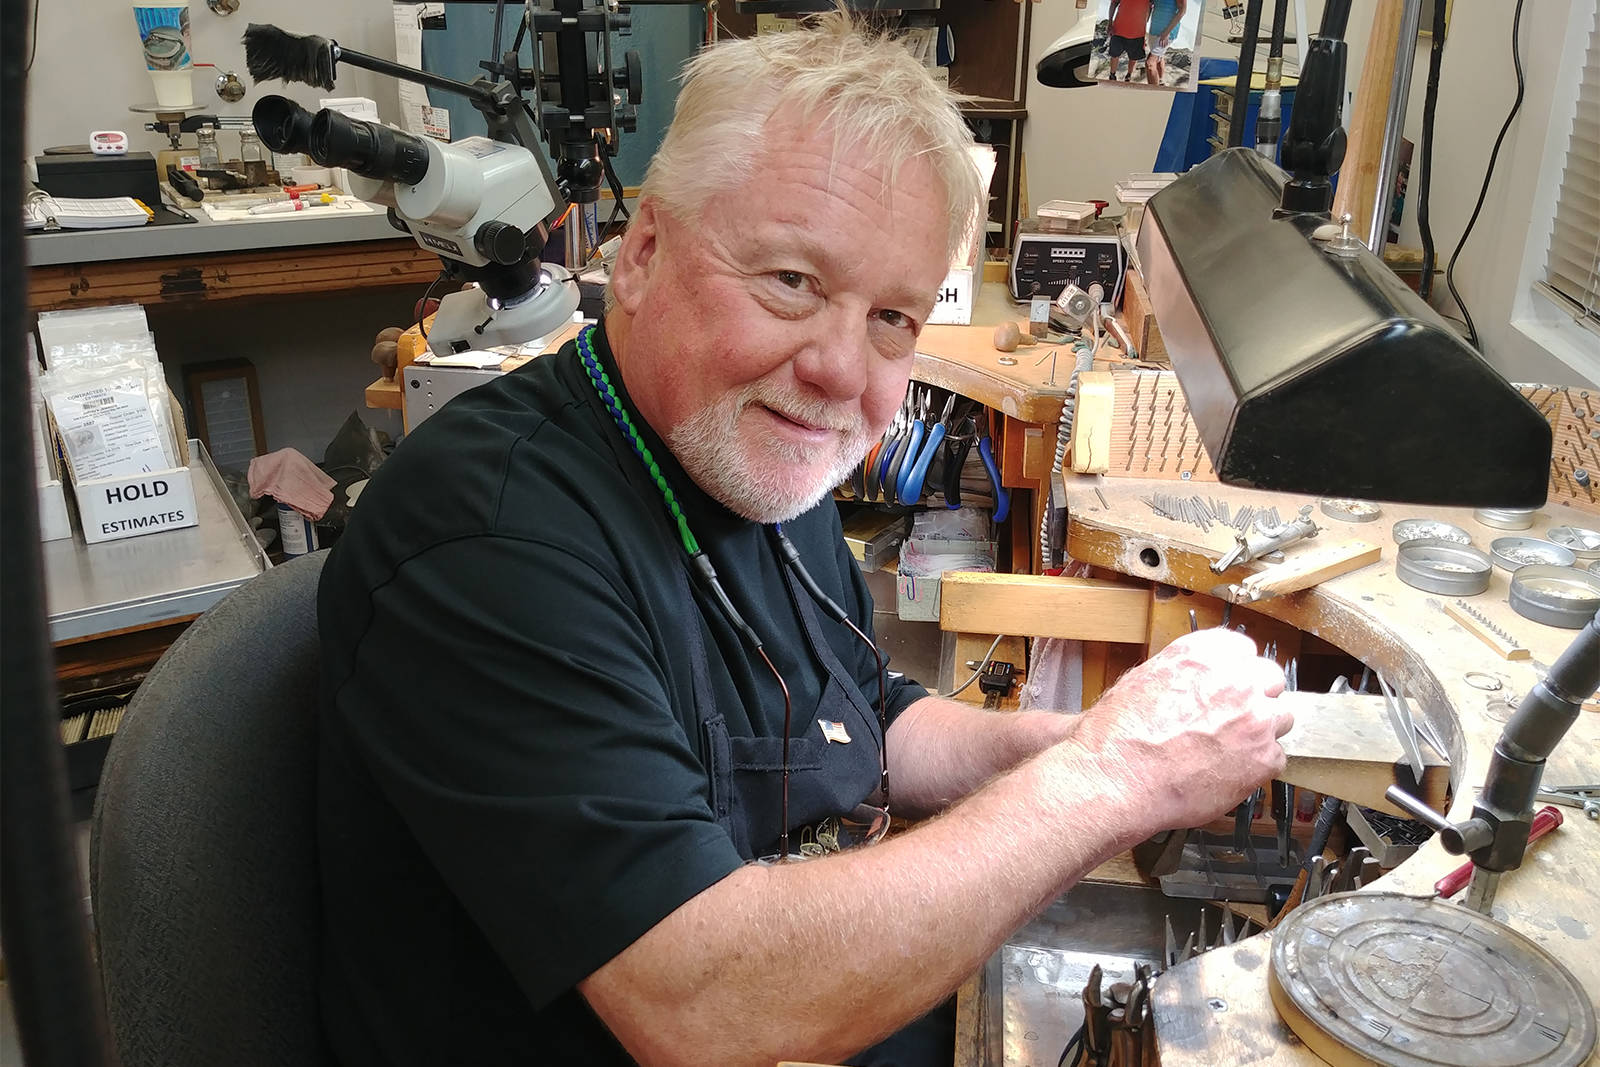 “I just love this work,” says Jeffrey Buetow, from Jeffrey’s Jewelry Design Studio in Federal Way.